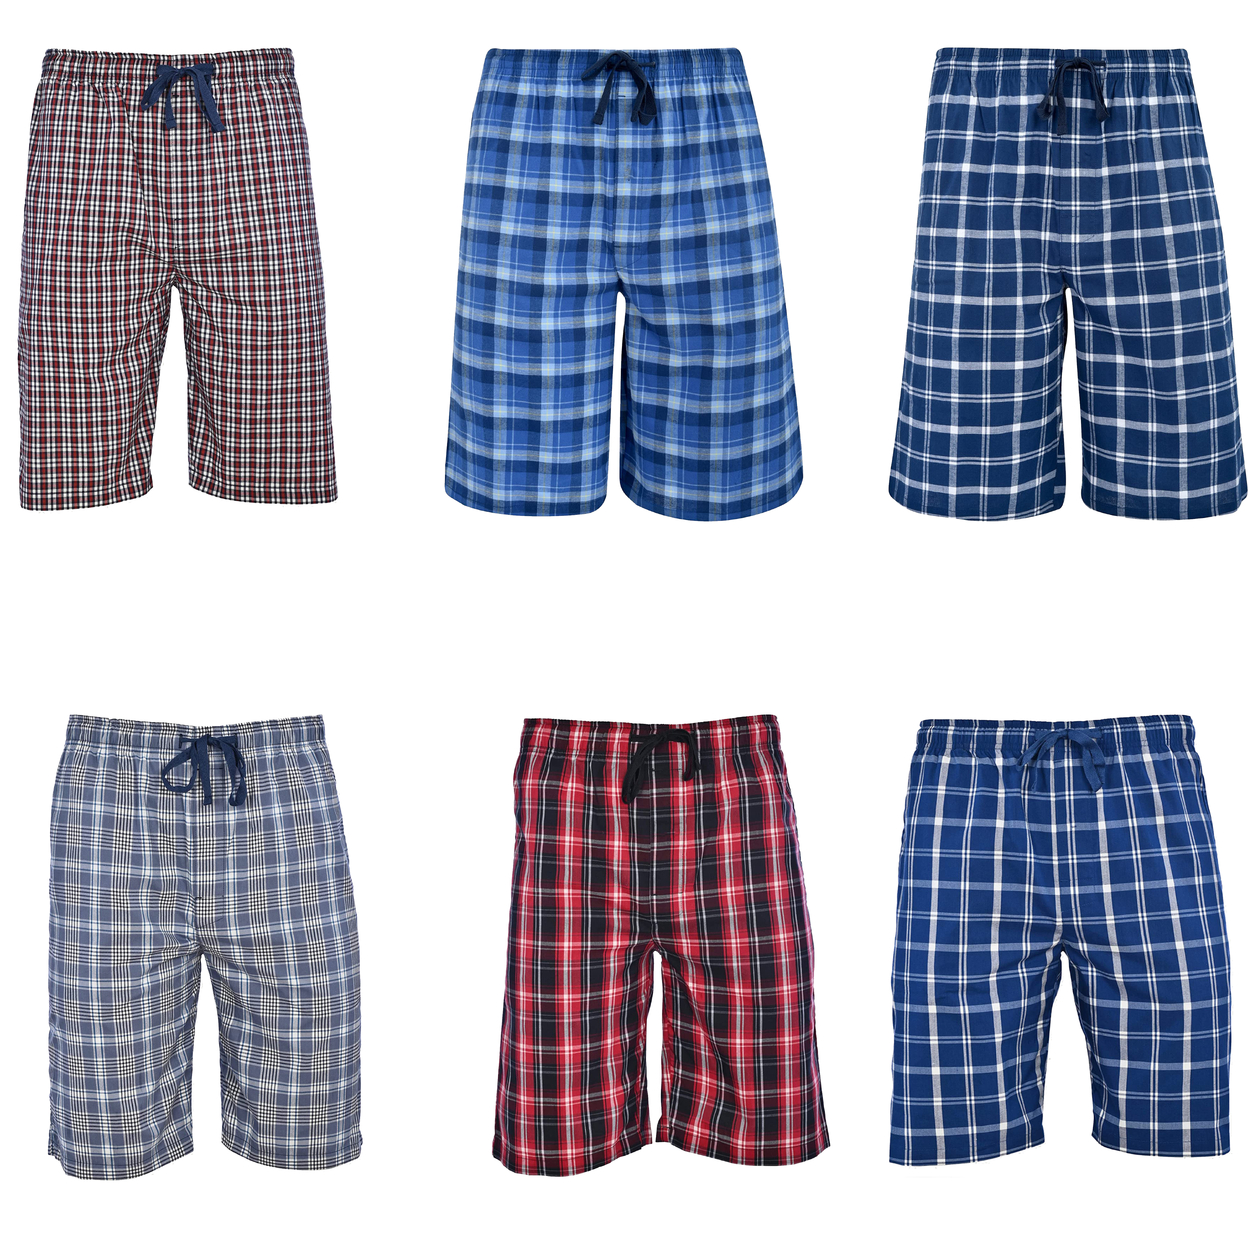 2-Pack: Men's Ultra Soft Plaid Lounge Pajama Sleep Wear Shorts - Red& Red, X-large